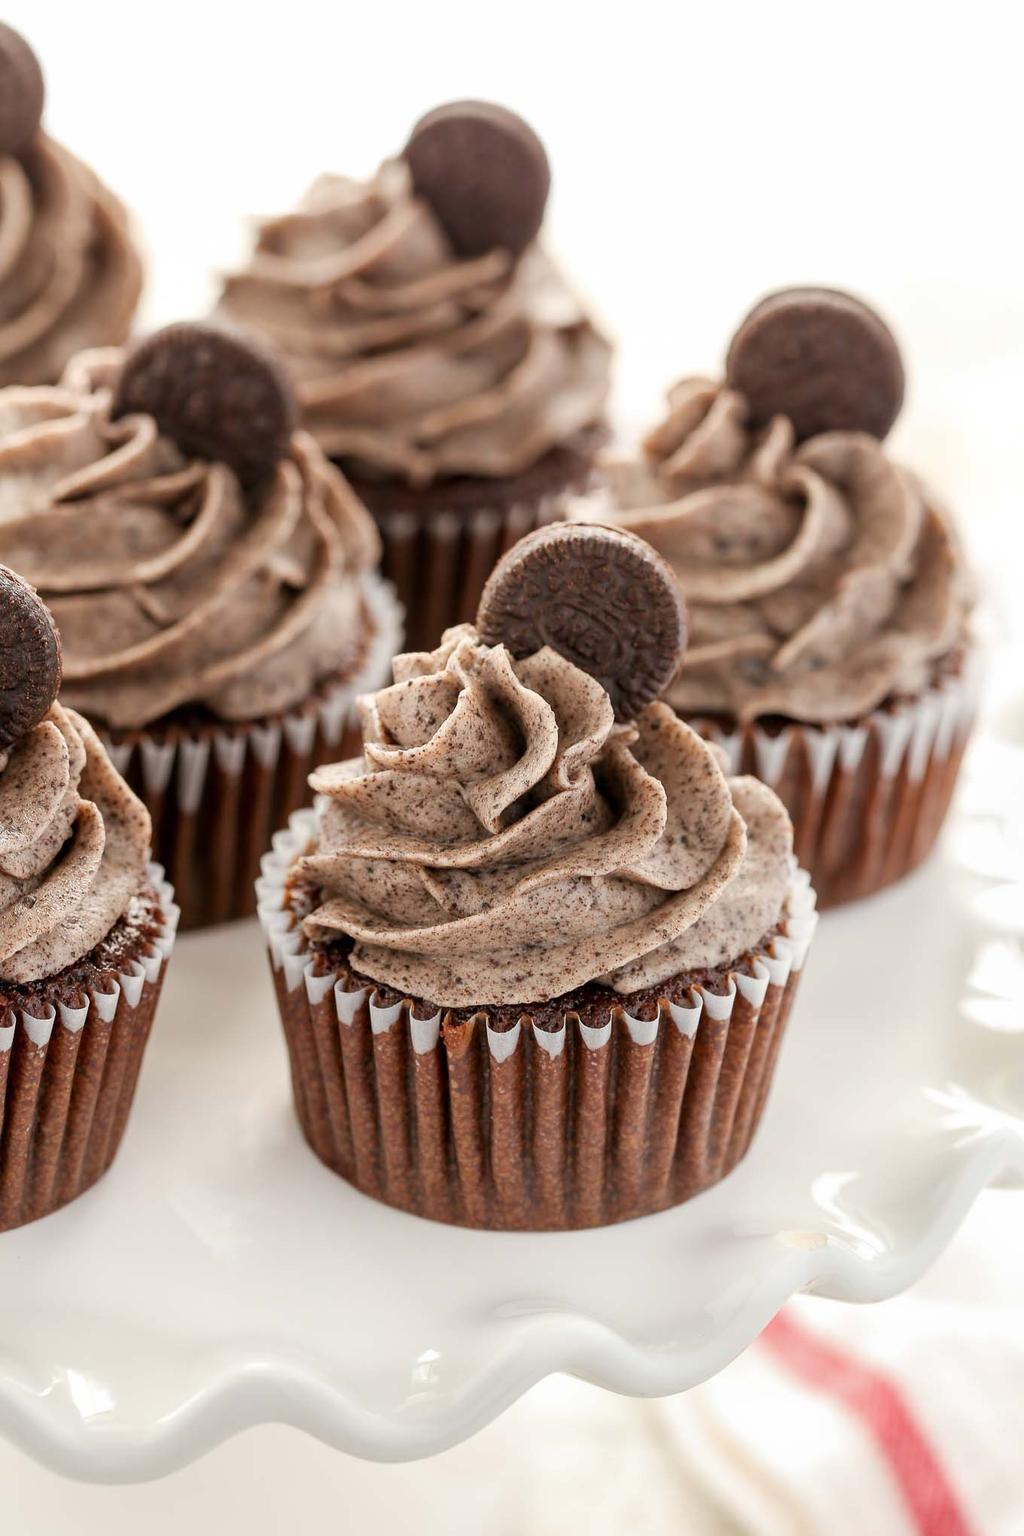 CHOCOLATE OREO CUPCAKES Dough: 1 cup flour 1/3 cup plus 2 tablespoons cocoa powder 3/4 teaspoon baking powder 1 / 2 teaspoon baking soda 1 / 2 teaspoon salt 1 / 2 cup brown sugar 1 / 2 cup granulated